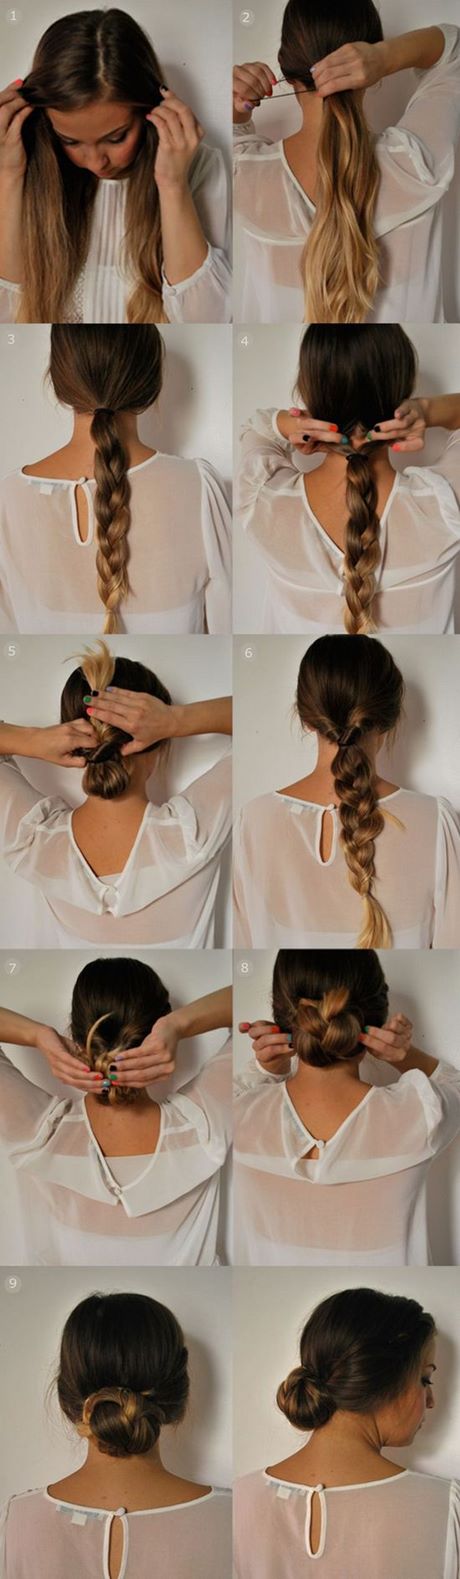 east-to-do-hairstyles-74 East to do hairstyles